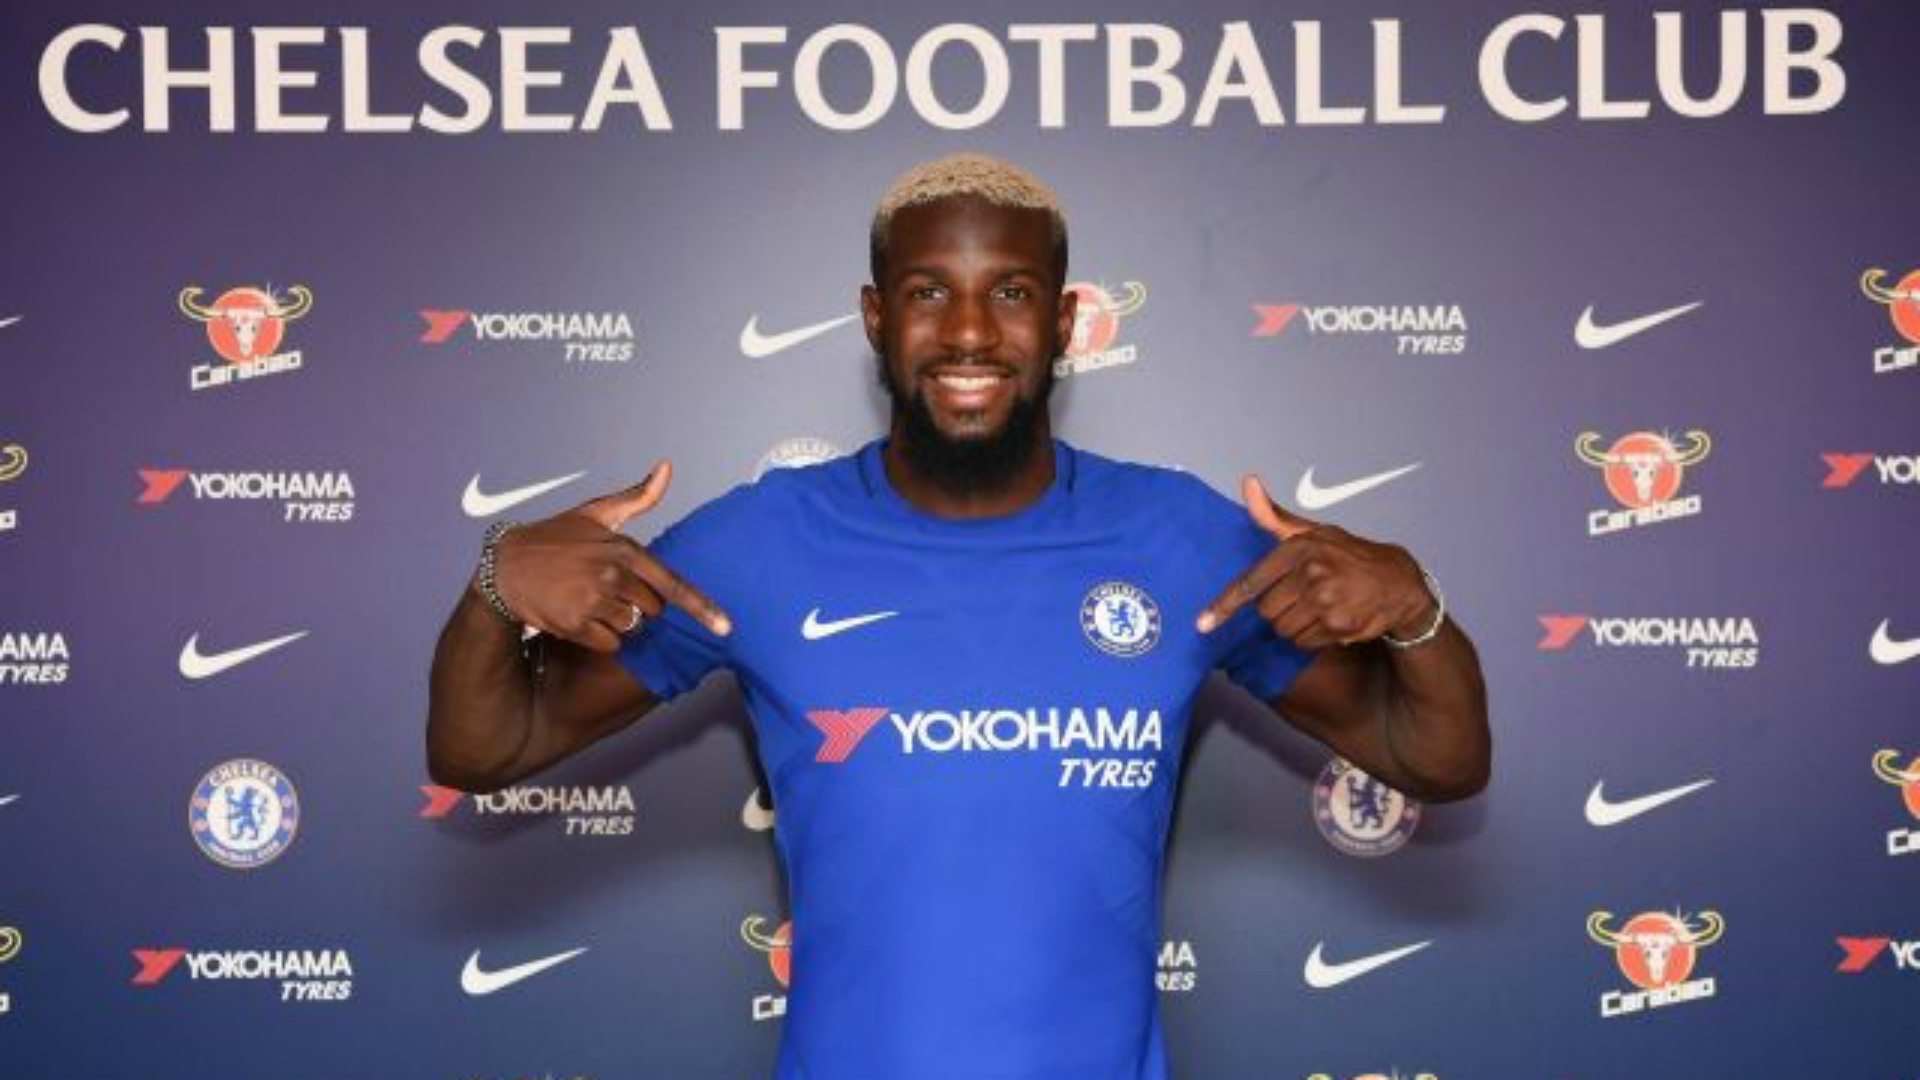 In recent weeks Chelsea got two important players, Antonio Rudiger and Tiemoue Bakayoko, improvements Conte had long been asking about.